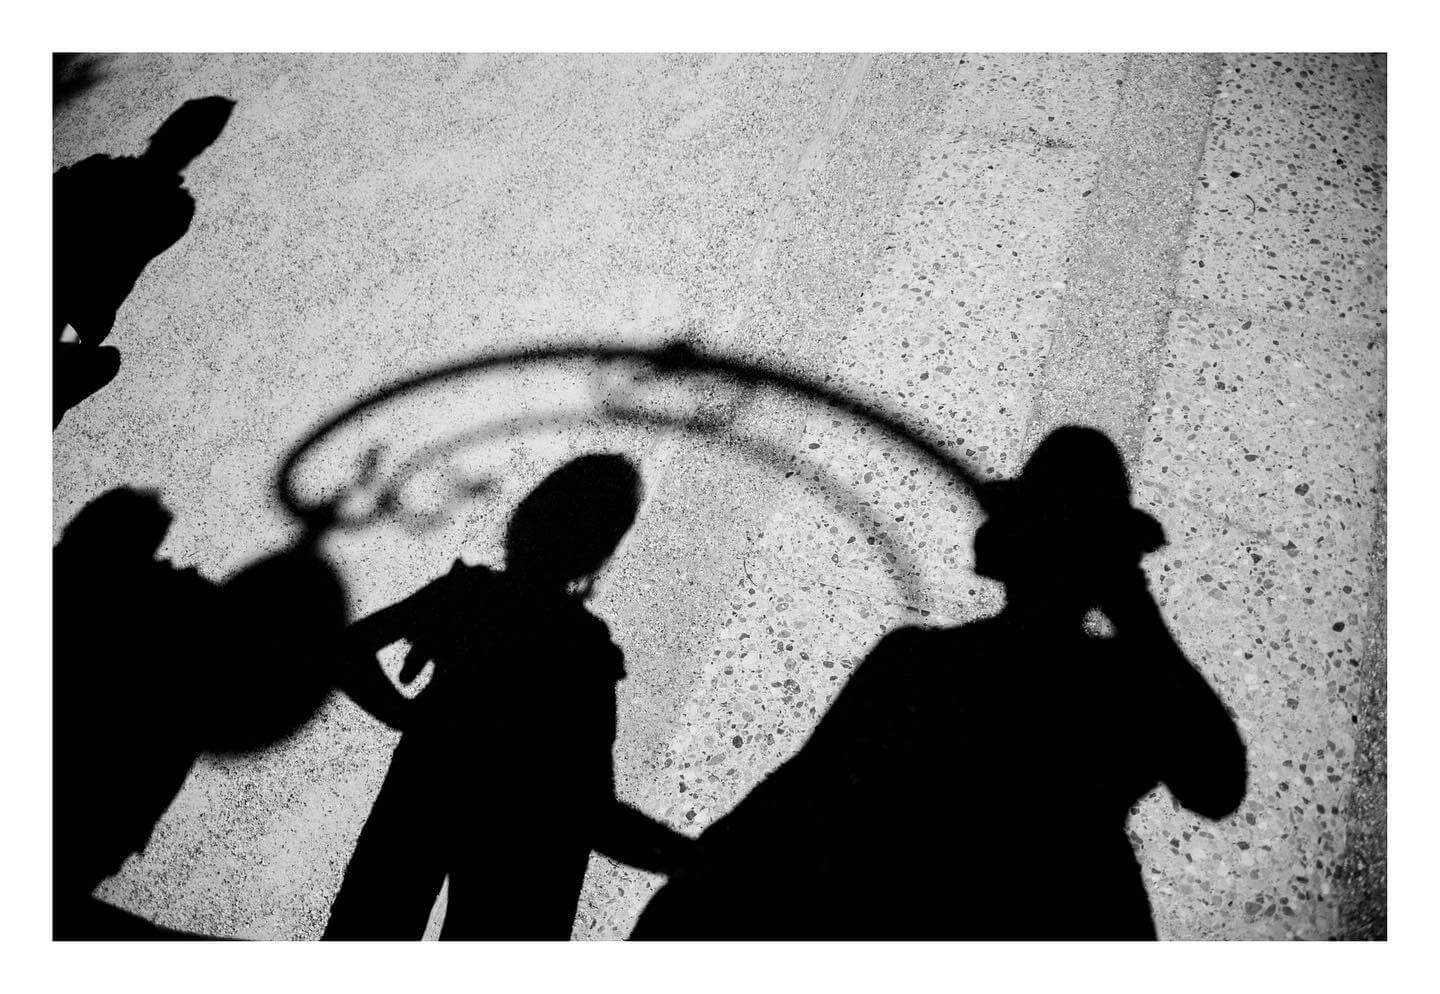 Marlene & I.
. 
On the left is my niece, one of my favourite people on the planet. 
.
@elisa_motterle and @emil_arnell 
.
#shadow #photography #silhouette #sunlight #backlight #love #marlene #bled #slovenia #bw #blackandwhite #canon